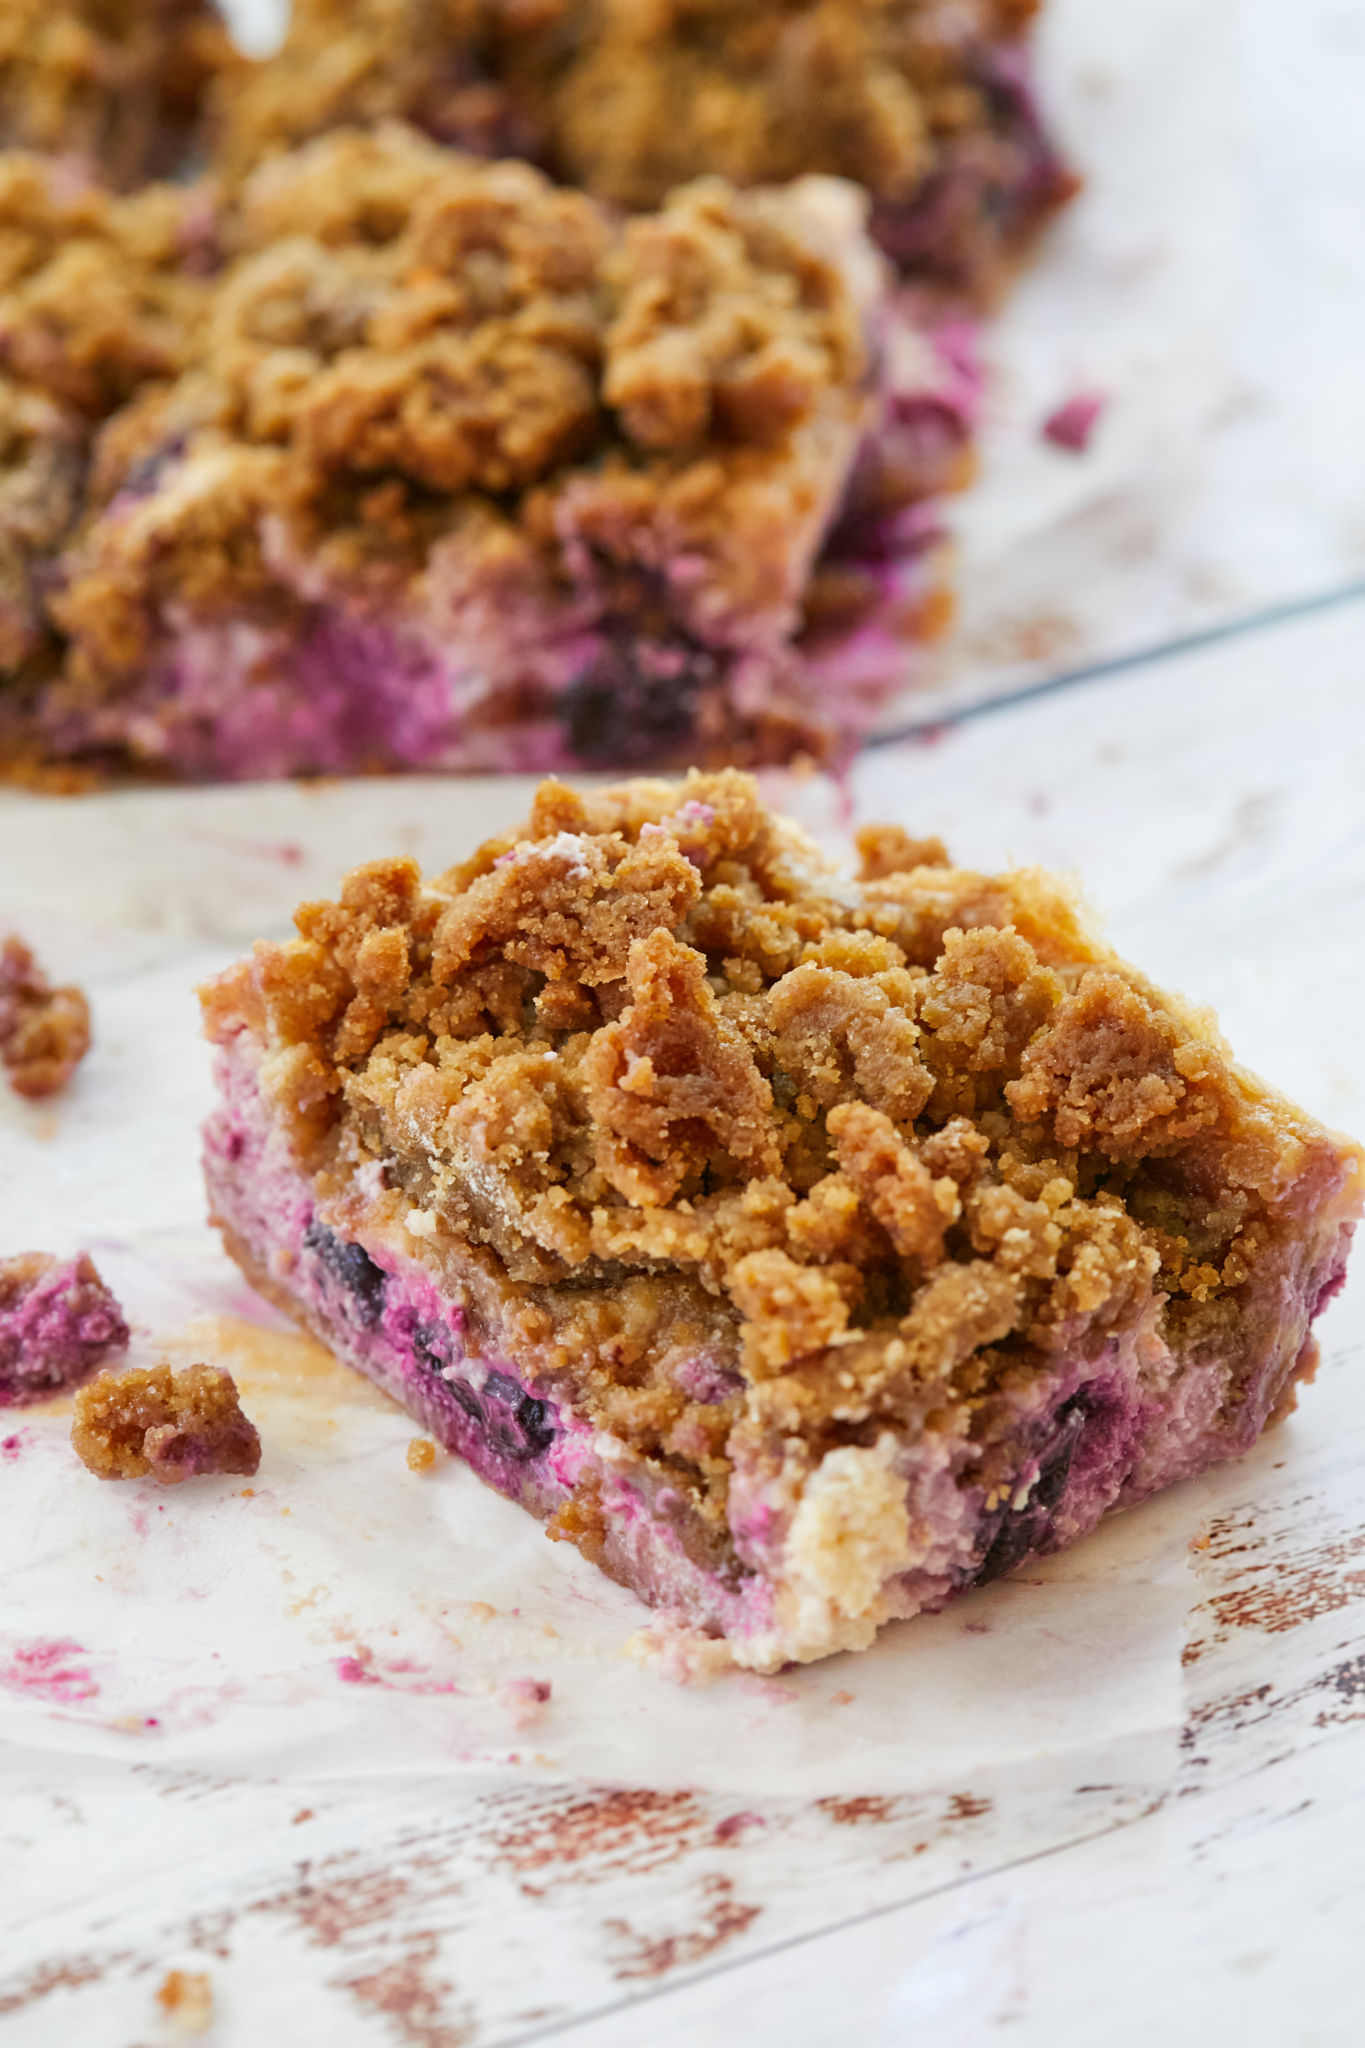 A blueberry and lemon cheesecake bar, topped with a crumb topping.